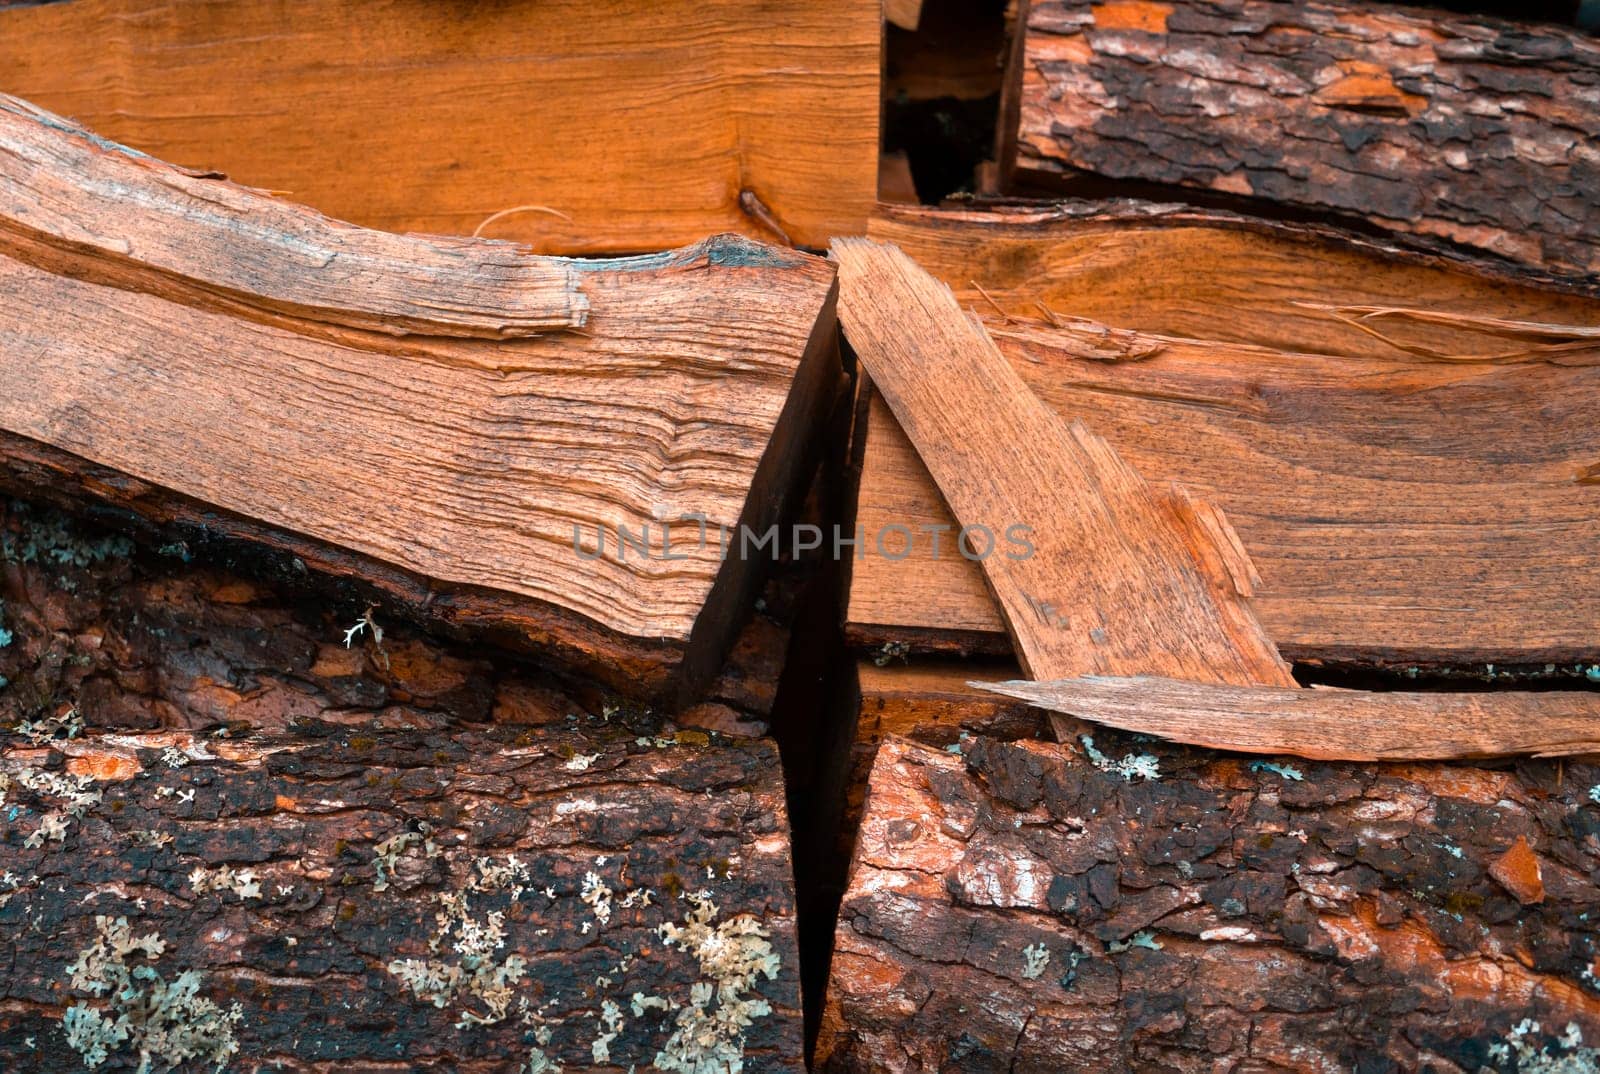 Old tree, logs, firewood harvested for the winter for the heating season, a beautiful background with textured wooden boards close-up.